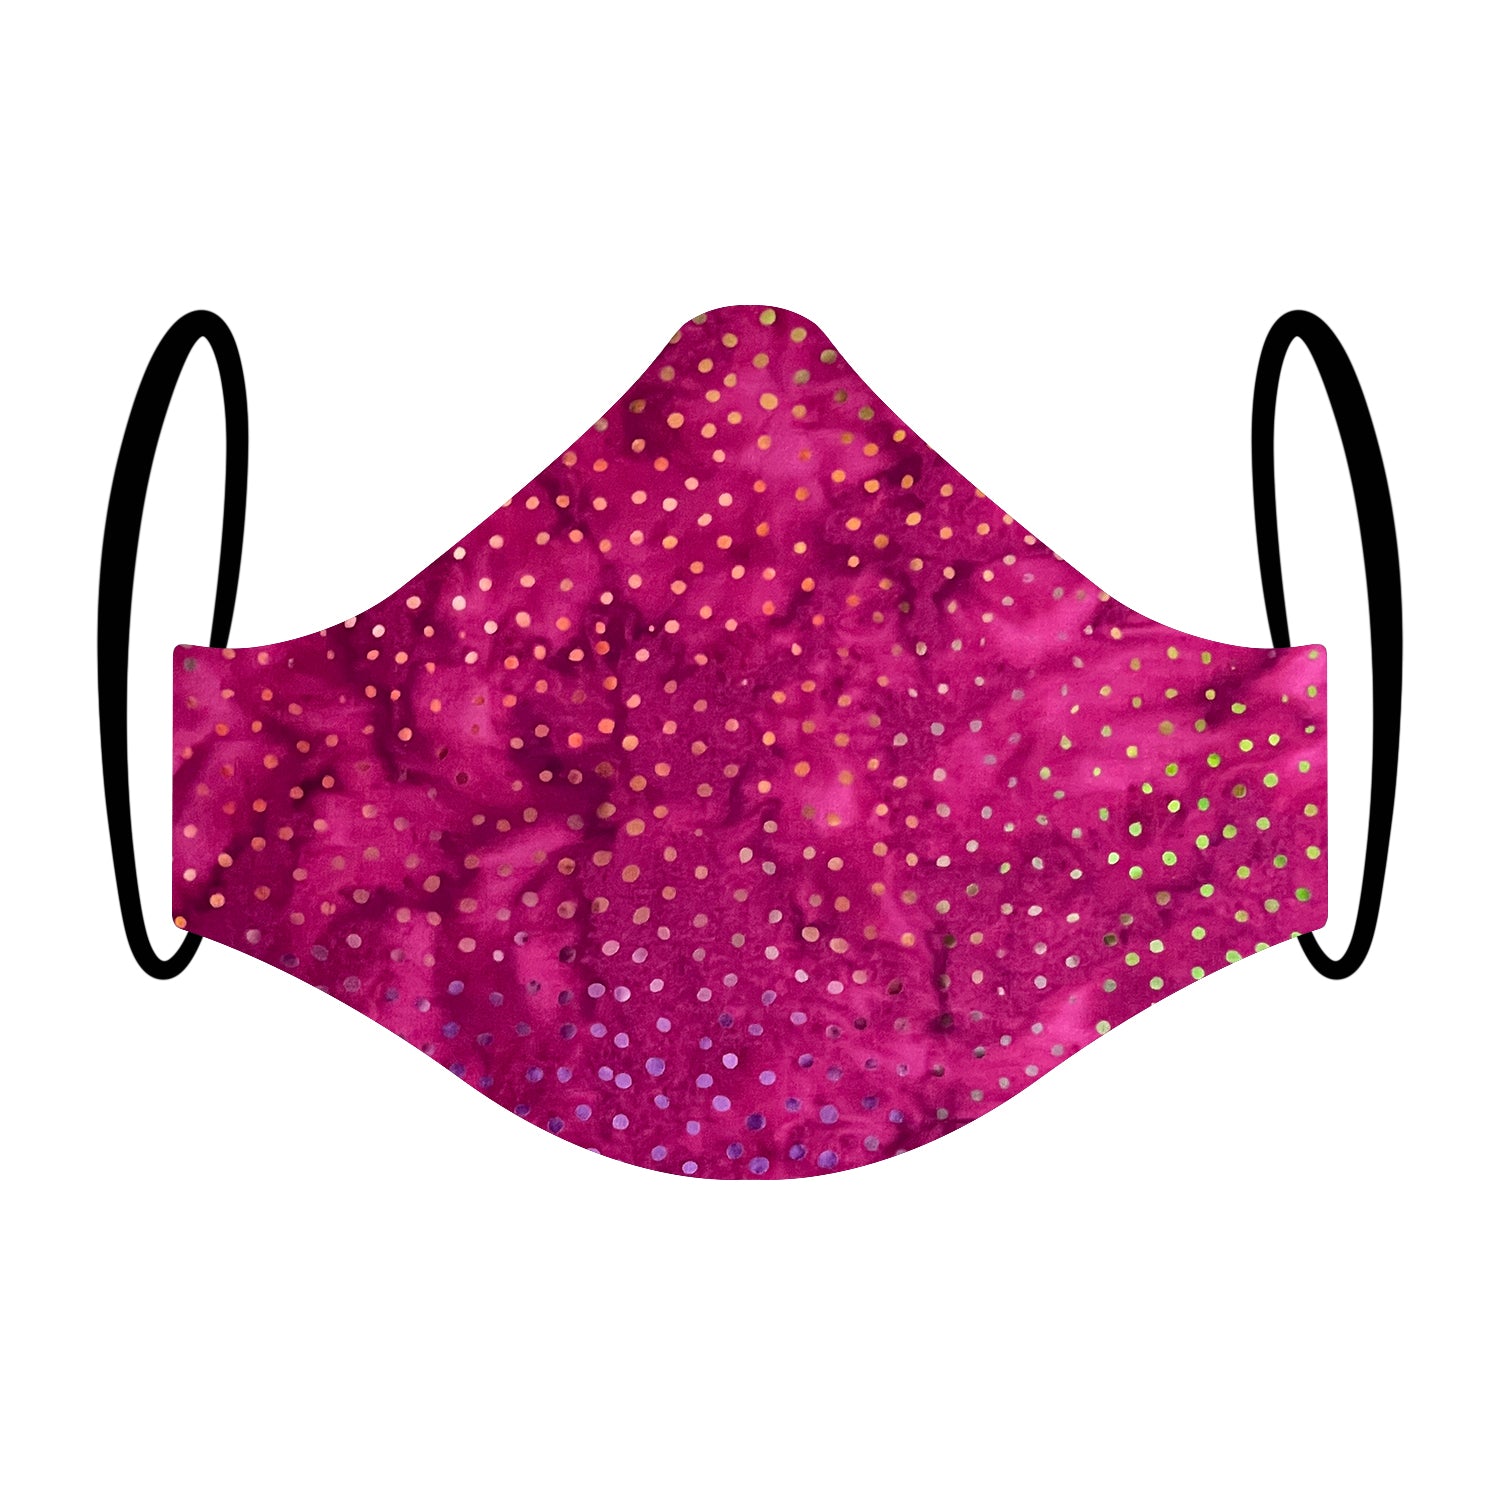 "Dance-floor Dreaming" Print Triple-layer Washable Face Mask